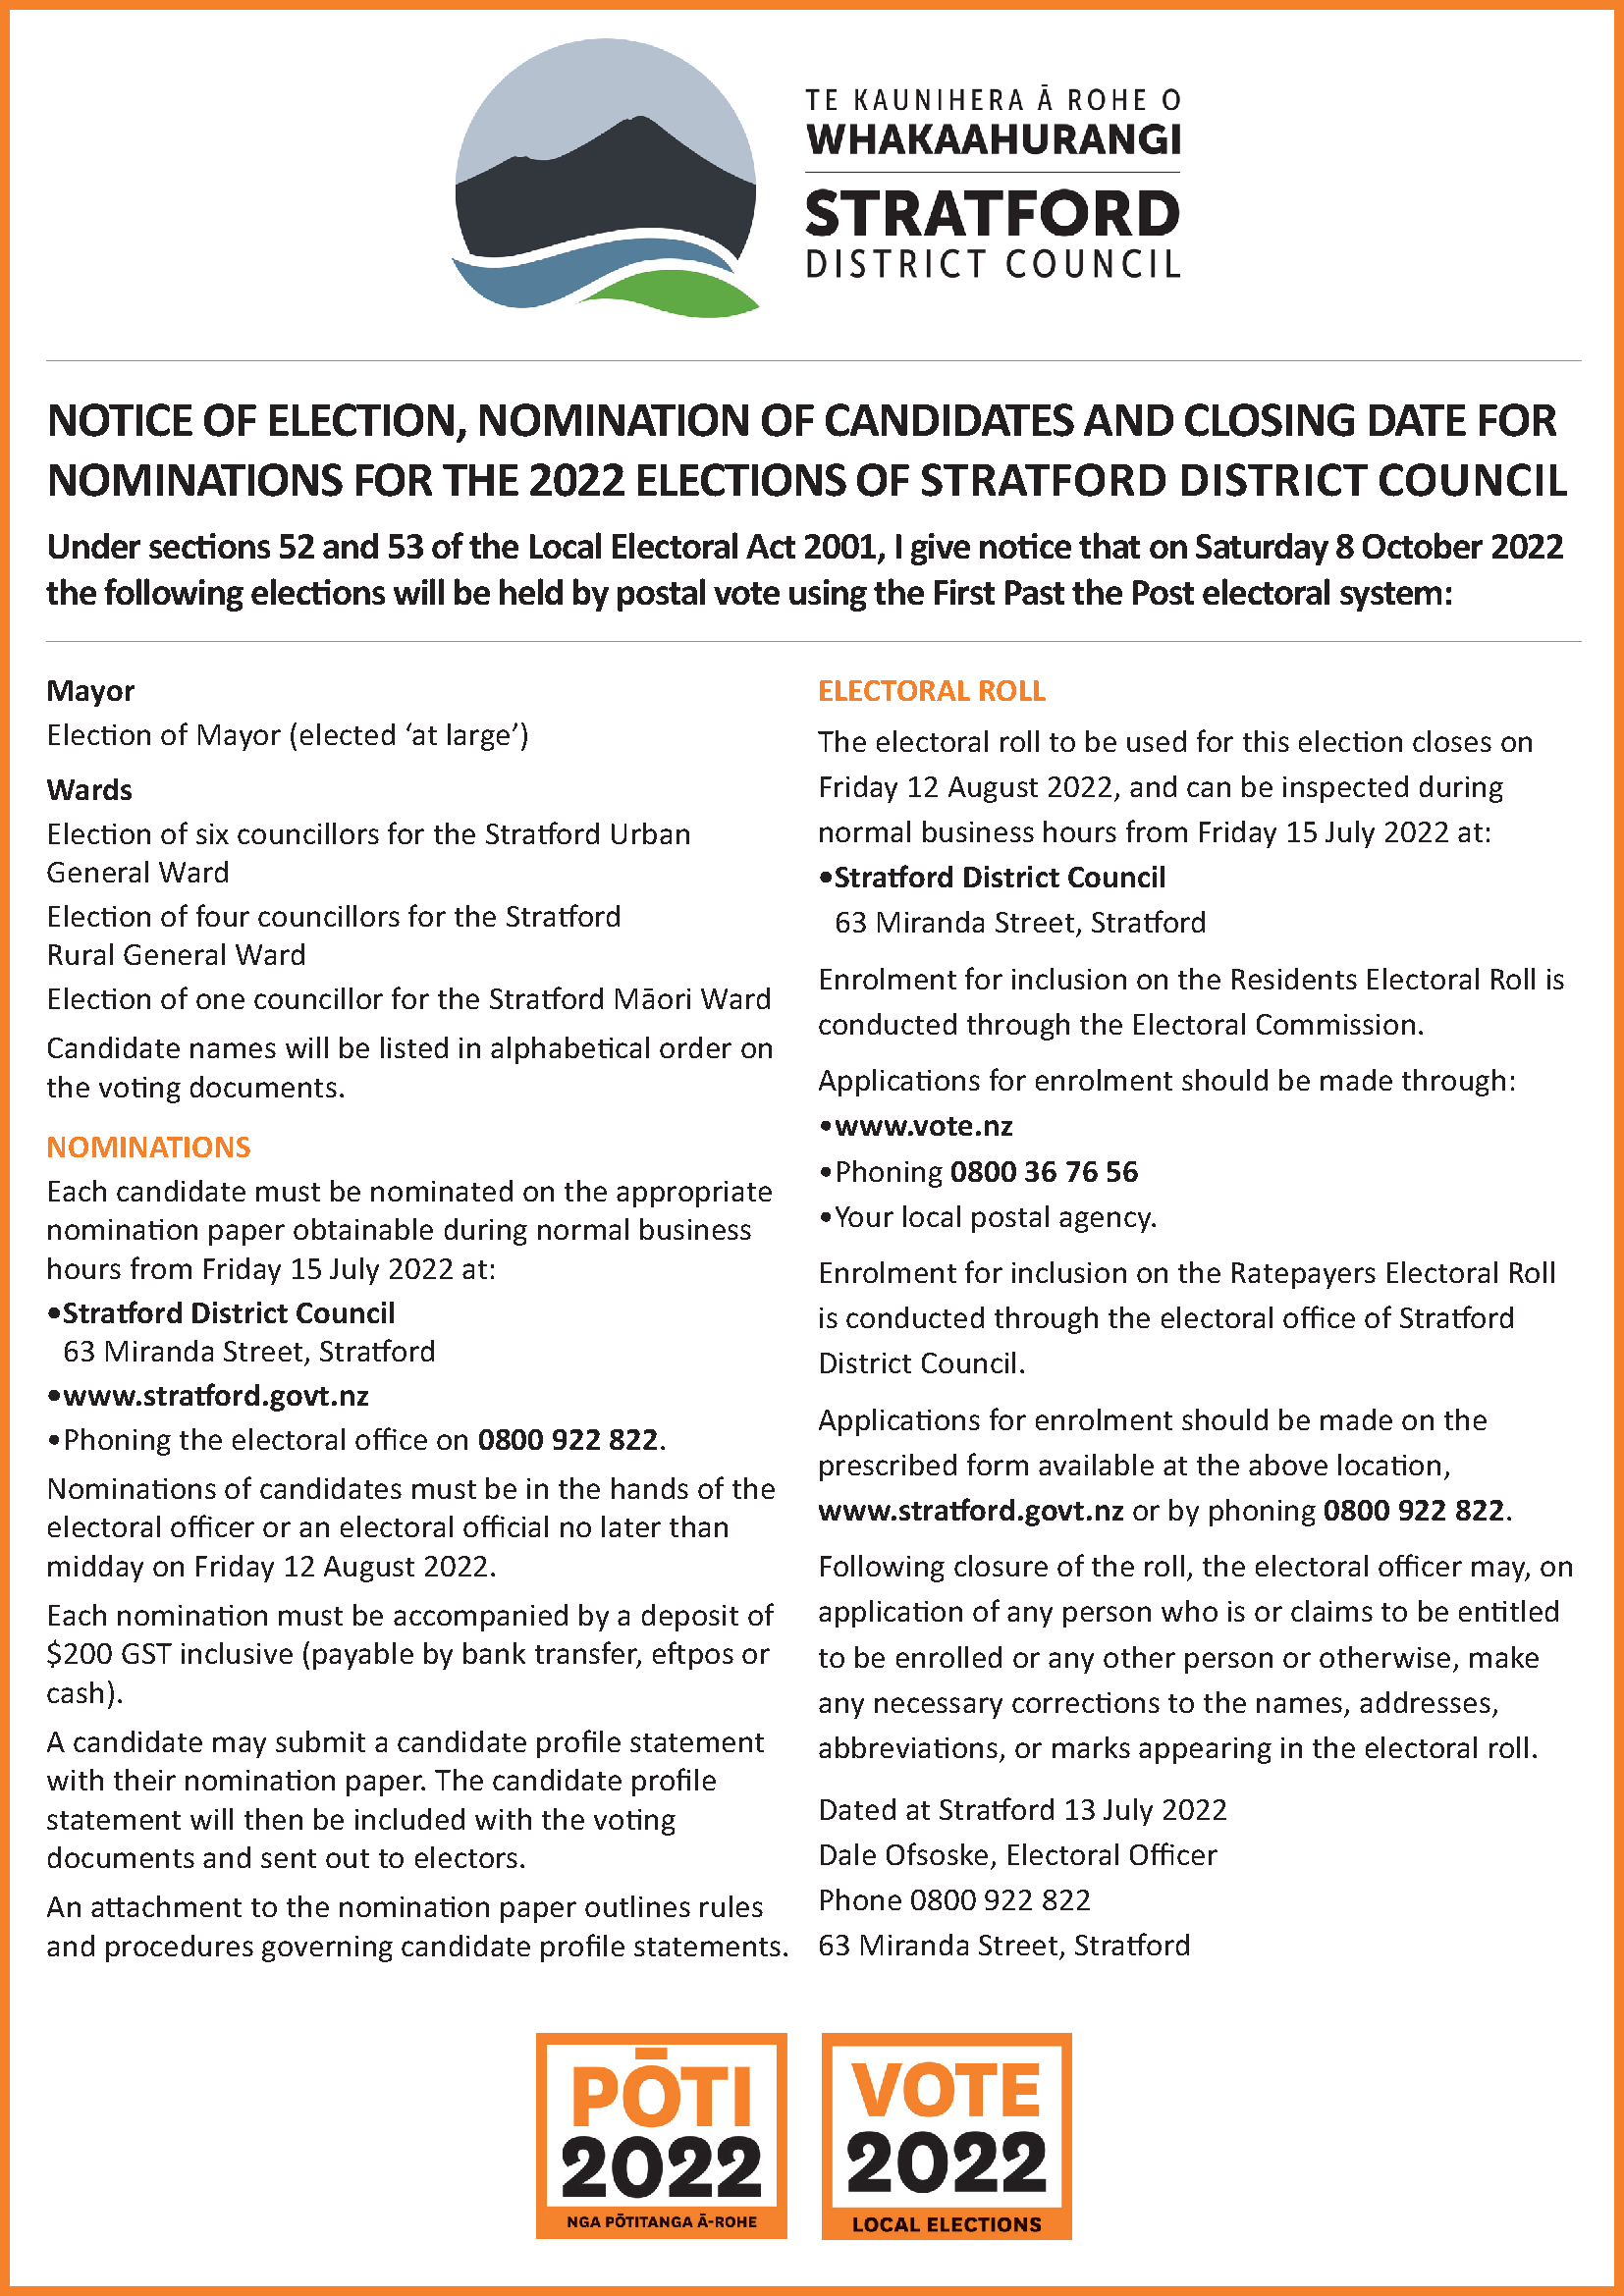 Notice of election.